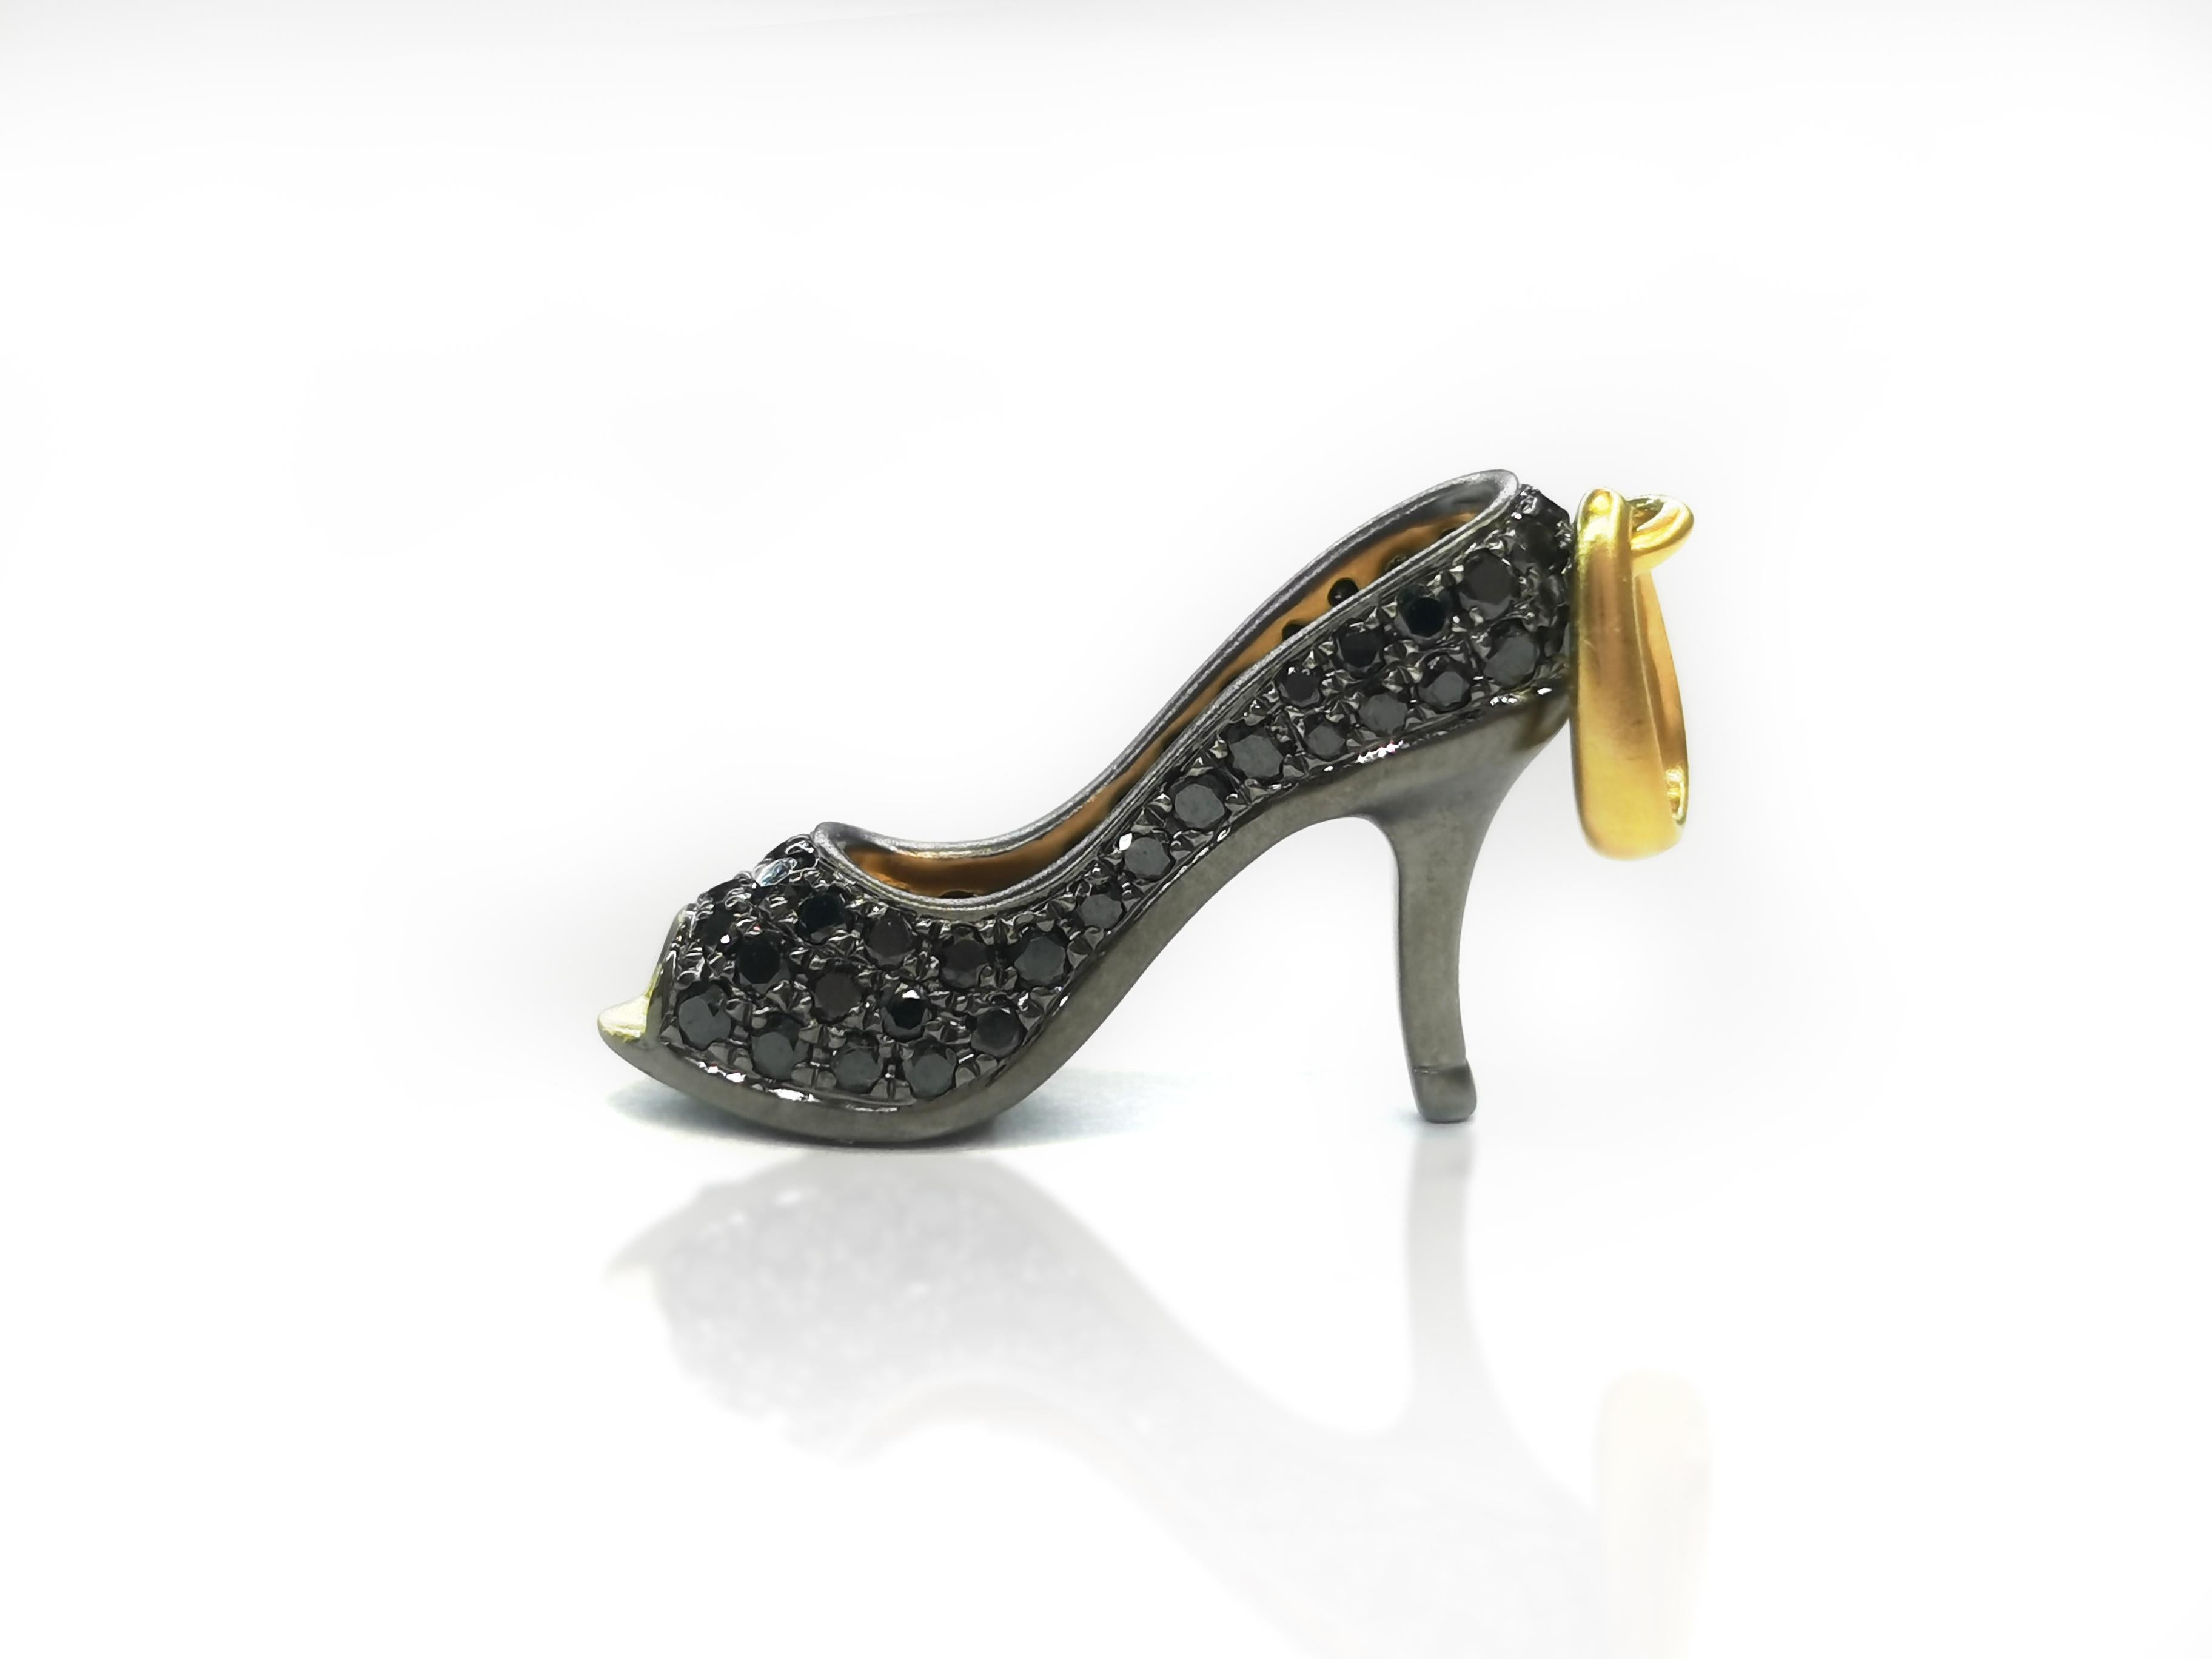 An elegant and very special high heel shoe pendant, set with brilliant black diamond weighing 0.36 carats, mounted in 18 Karat gold. 
O’Che 1867 was founded one and a half centuries ago in Macau. The brand is renowned for its high jewellery